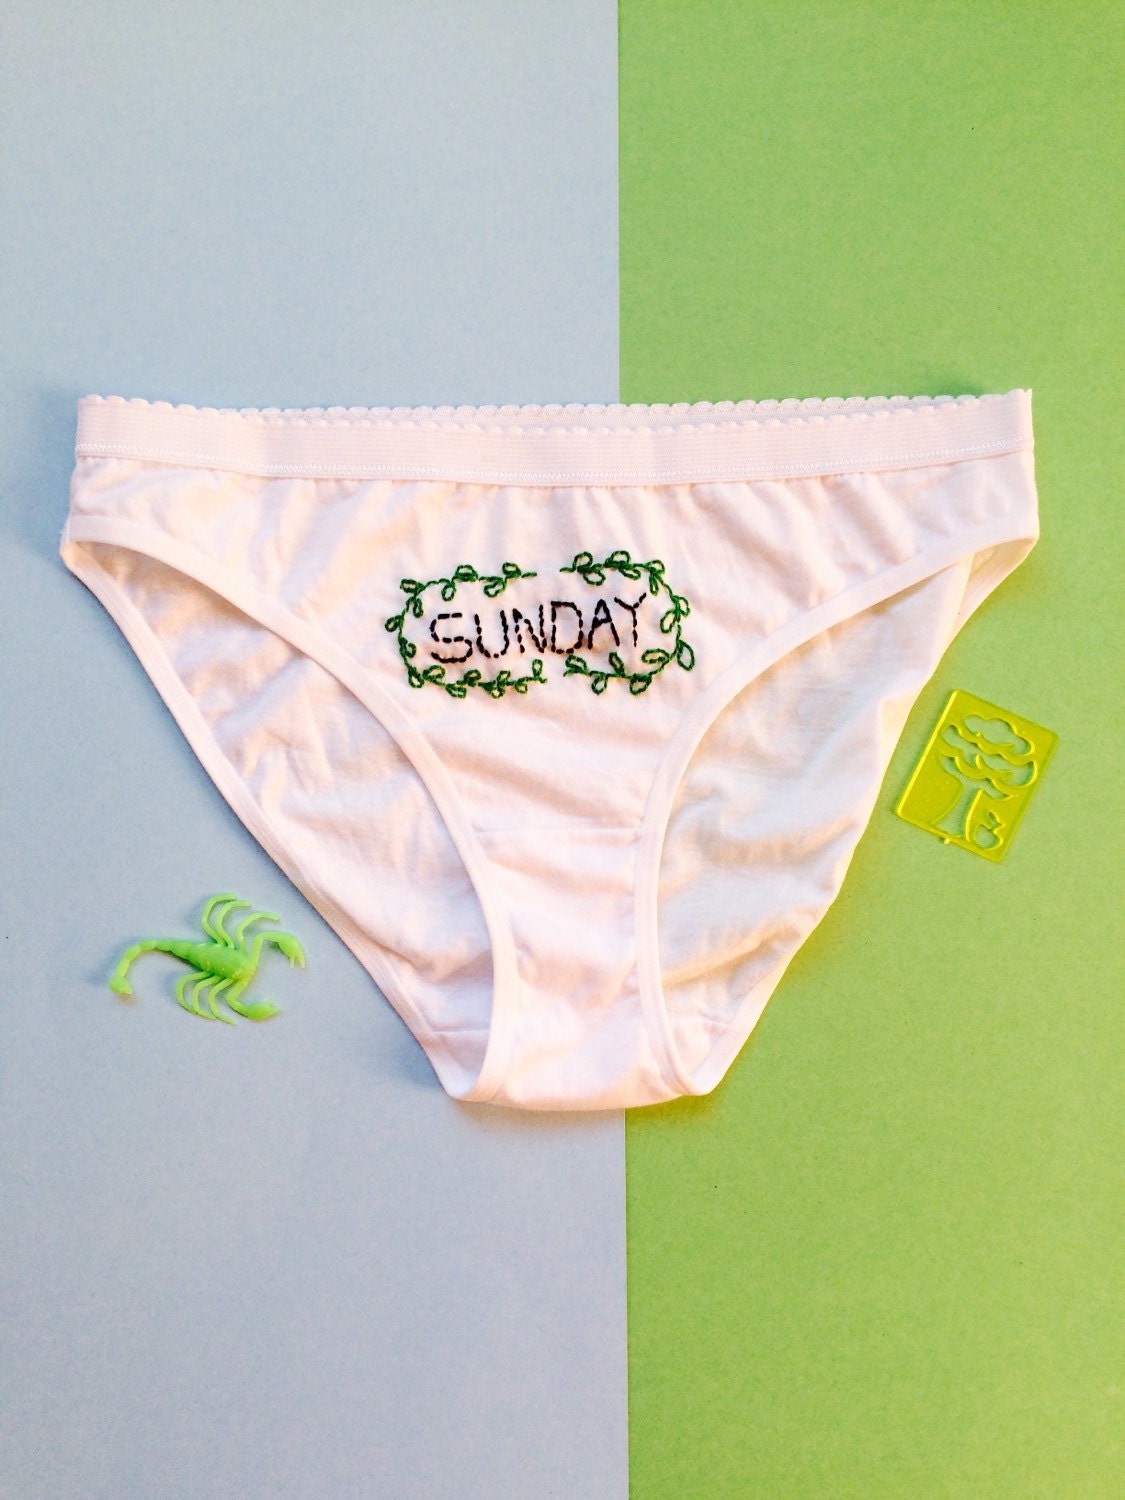 Ooak Hand Embroidered Sunday Panties By Embroiderline On Etsy